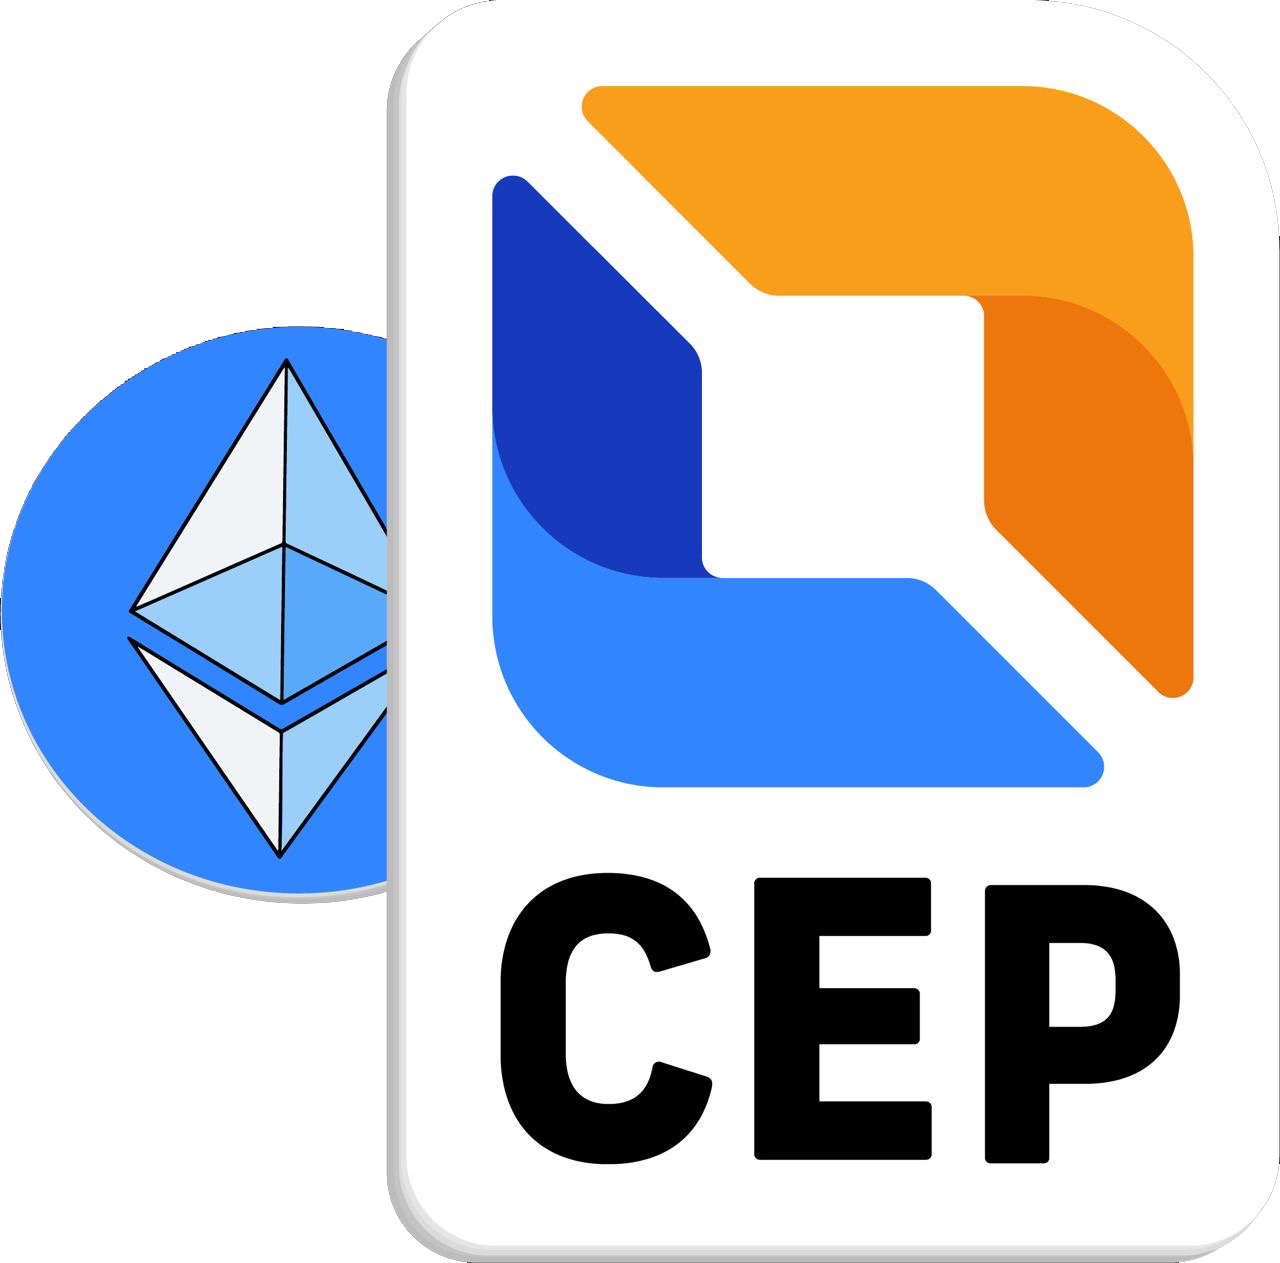 Logo for Certified Ethereum Professional (CEP)